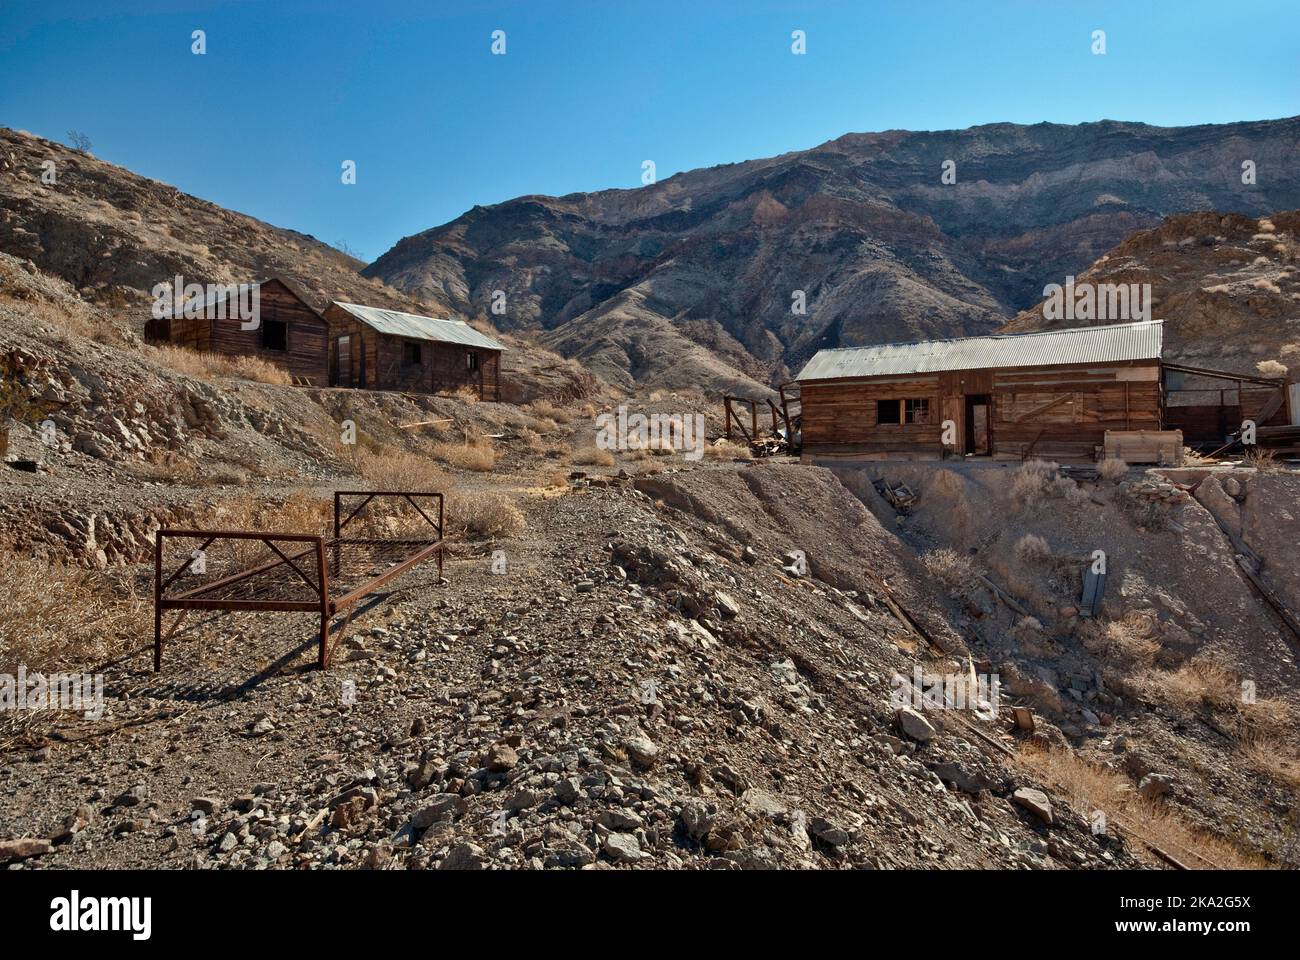 Ruins at Ashford Mine ghost town in Black Mountains, Mojave Desert, Death Valley National Park, California, USA Stock Photo